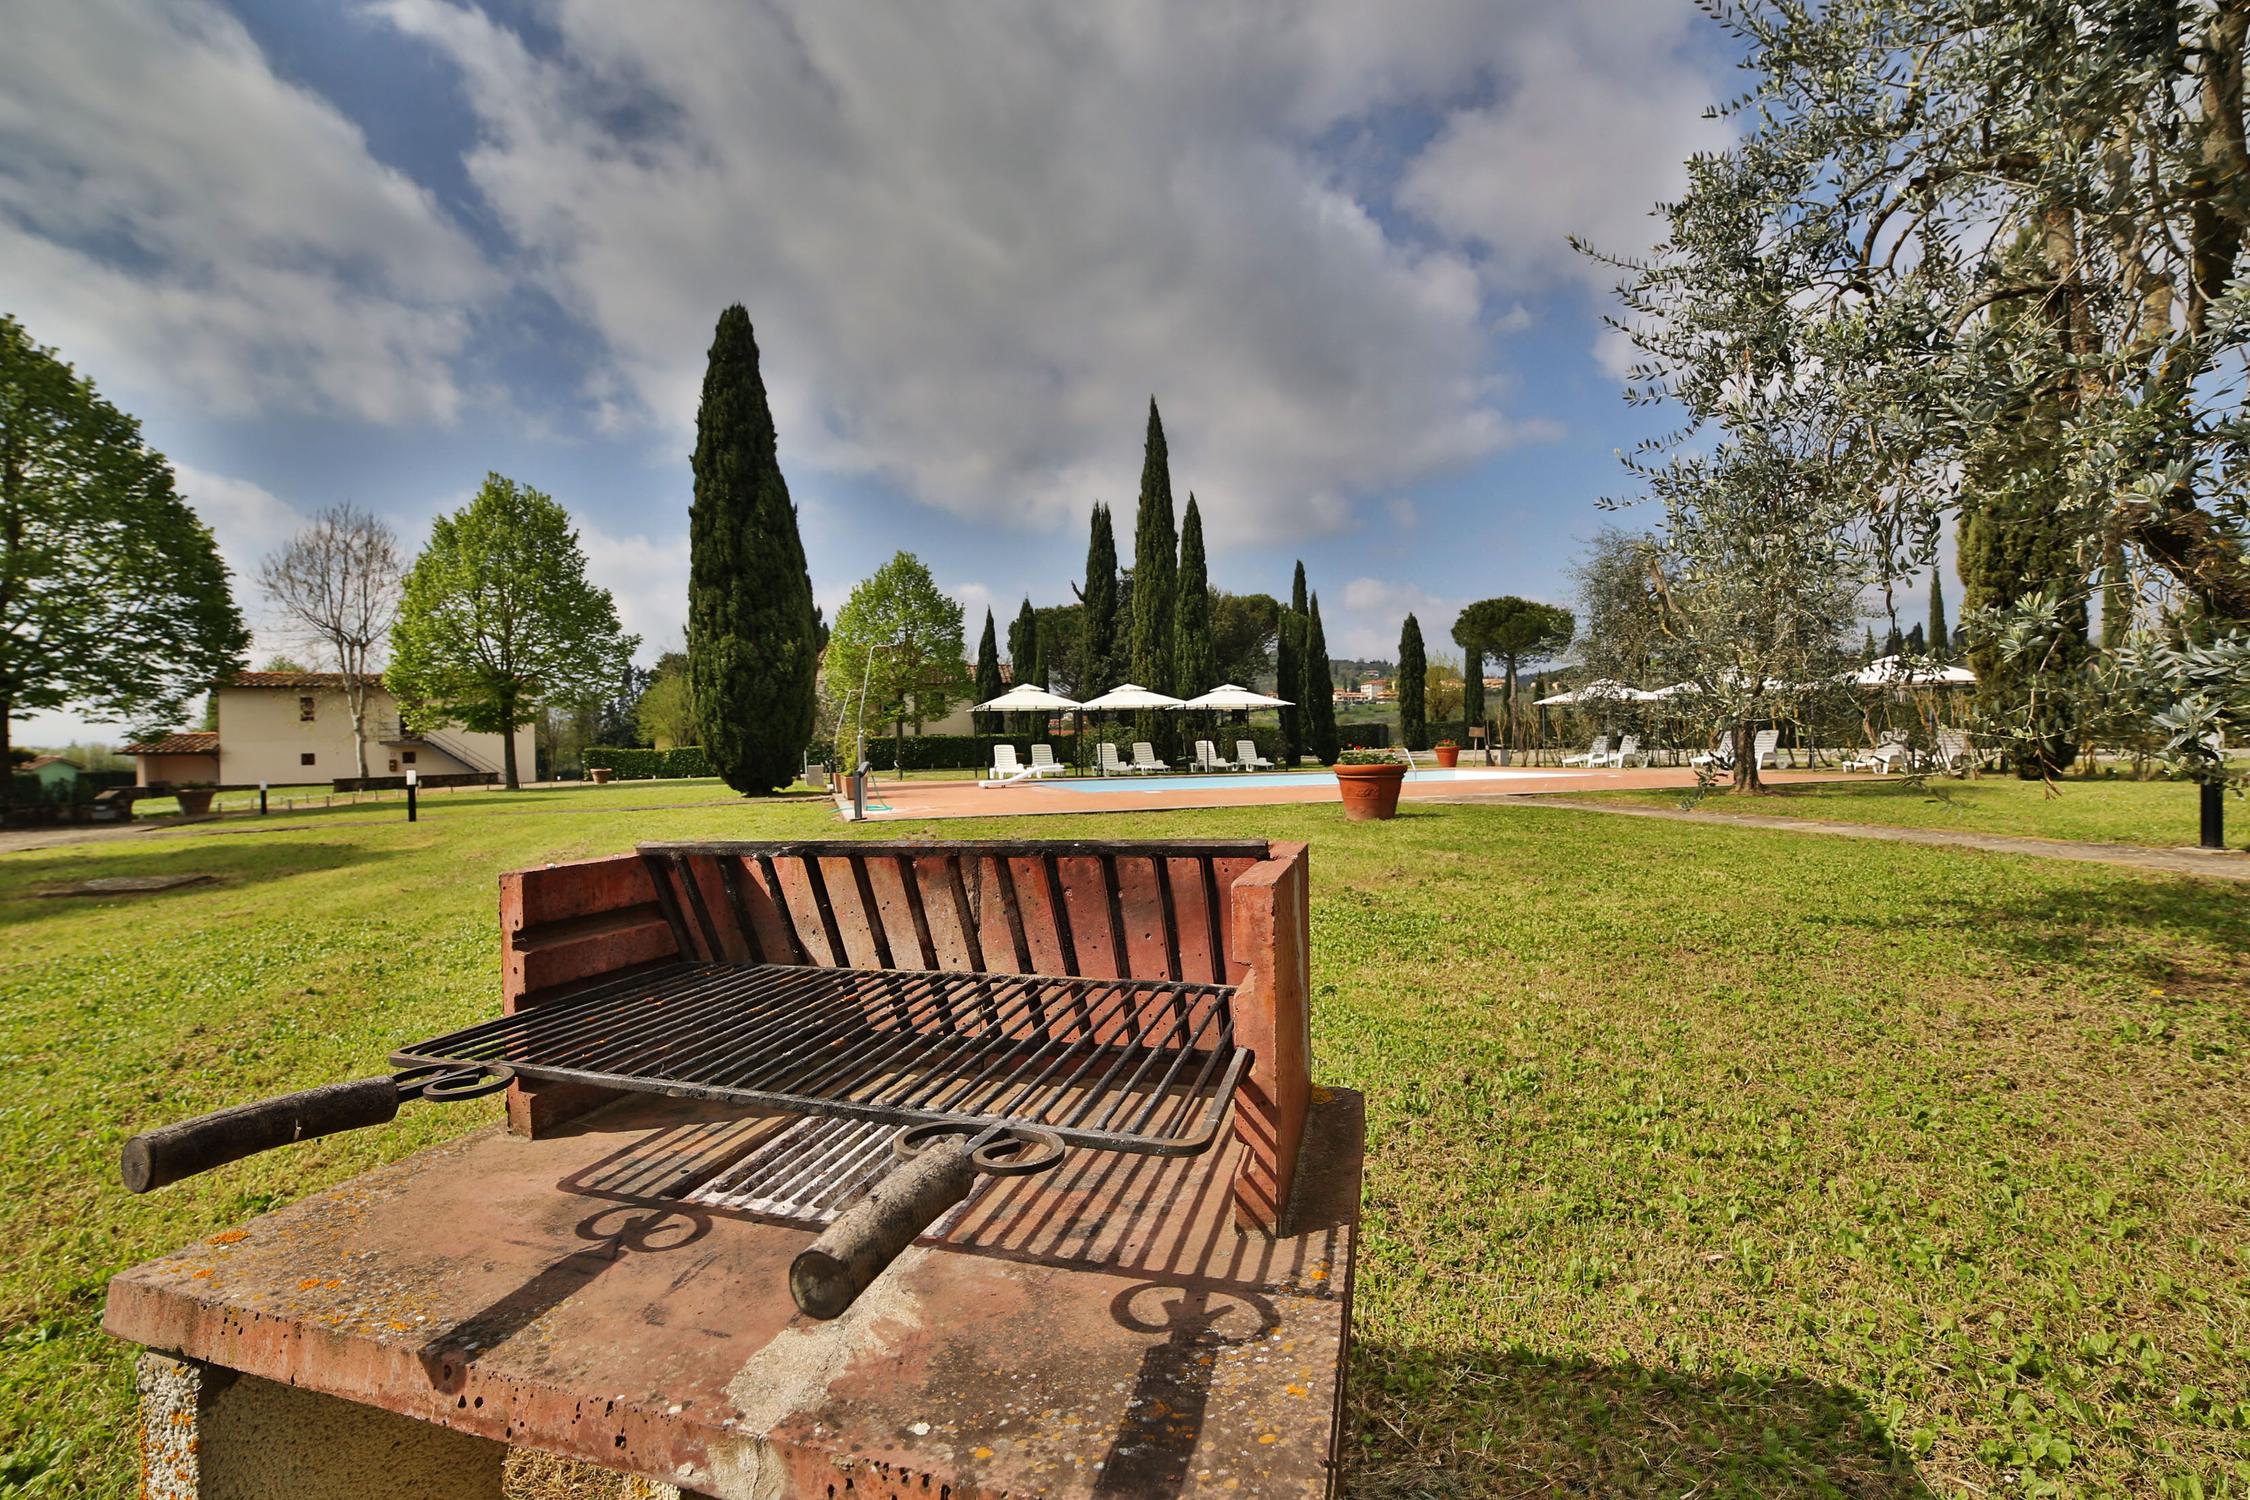 What to do during your stay at Fattoria Pagnana, Agritourism in Chianti, Florence